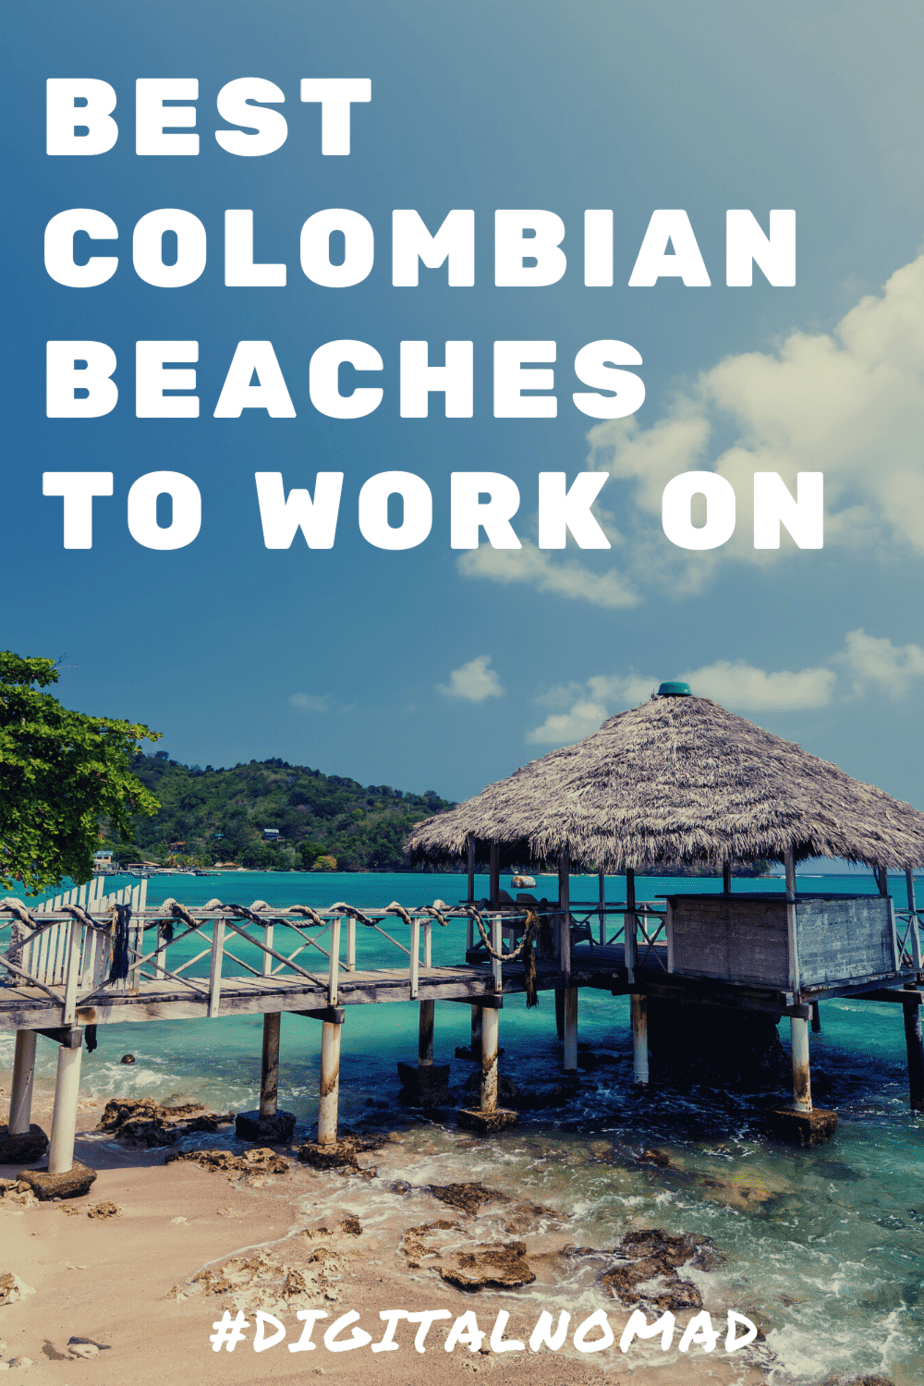 Colombia bes tbeaches for digital nomads